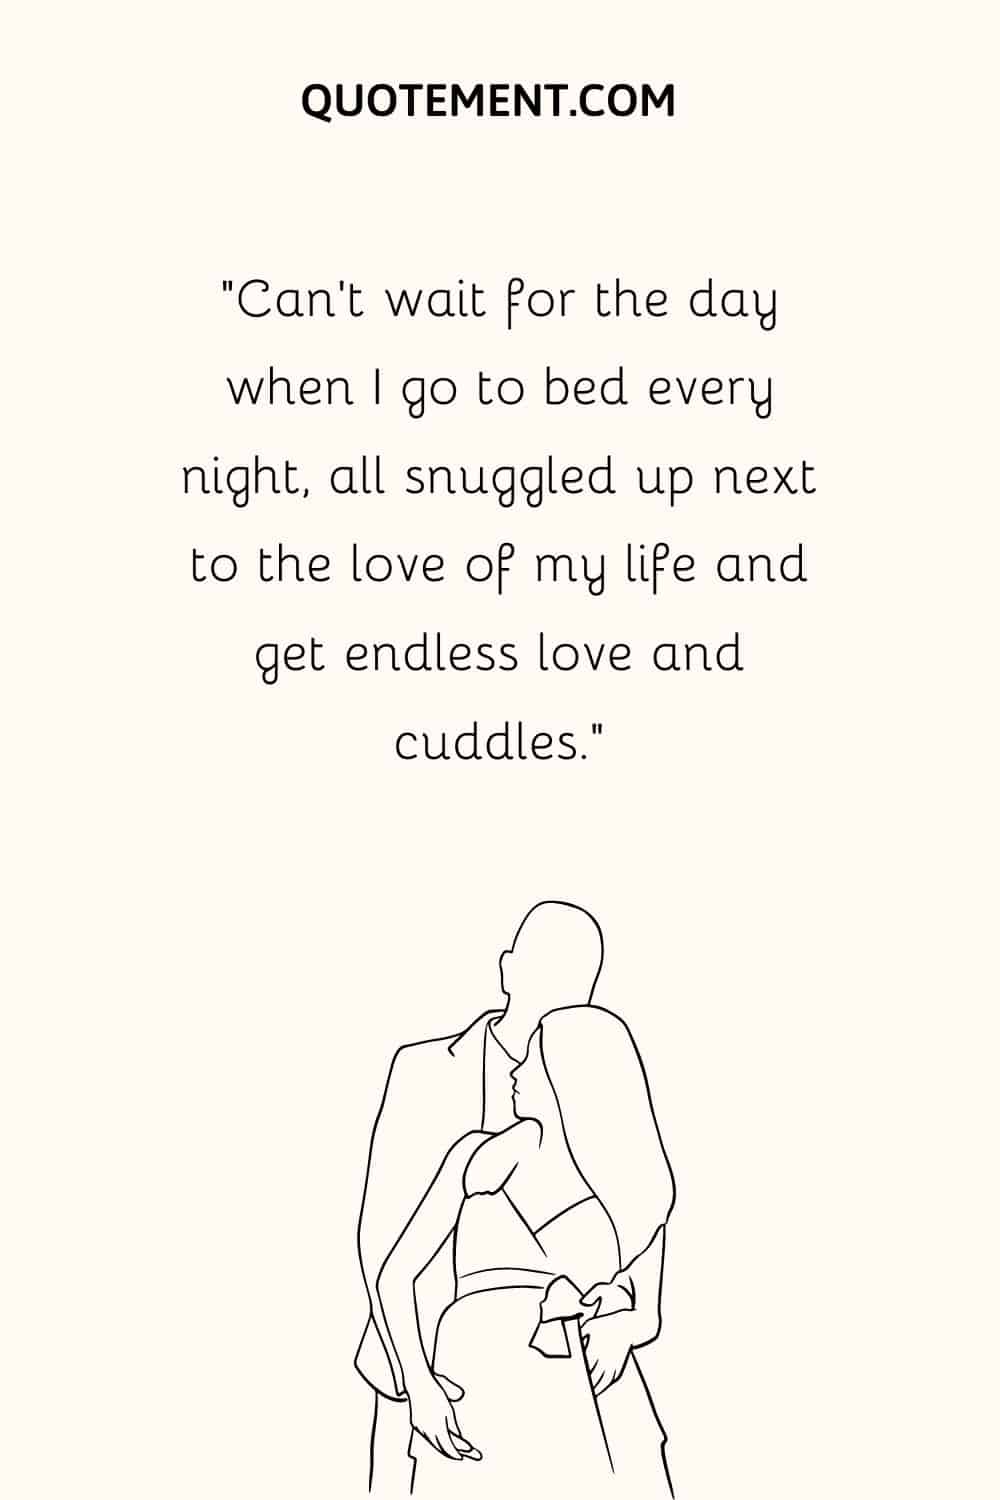 “Can’t wait for the day when I go to bed every night, all snuggled up next to the love of my life and get endless love and cuddles.”